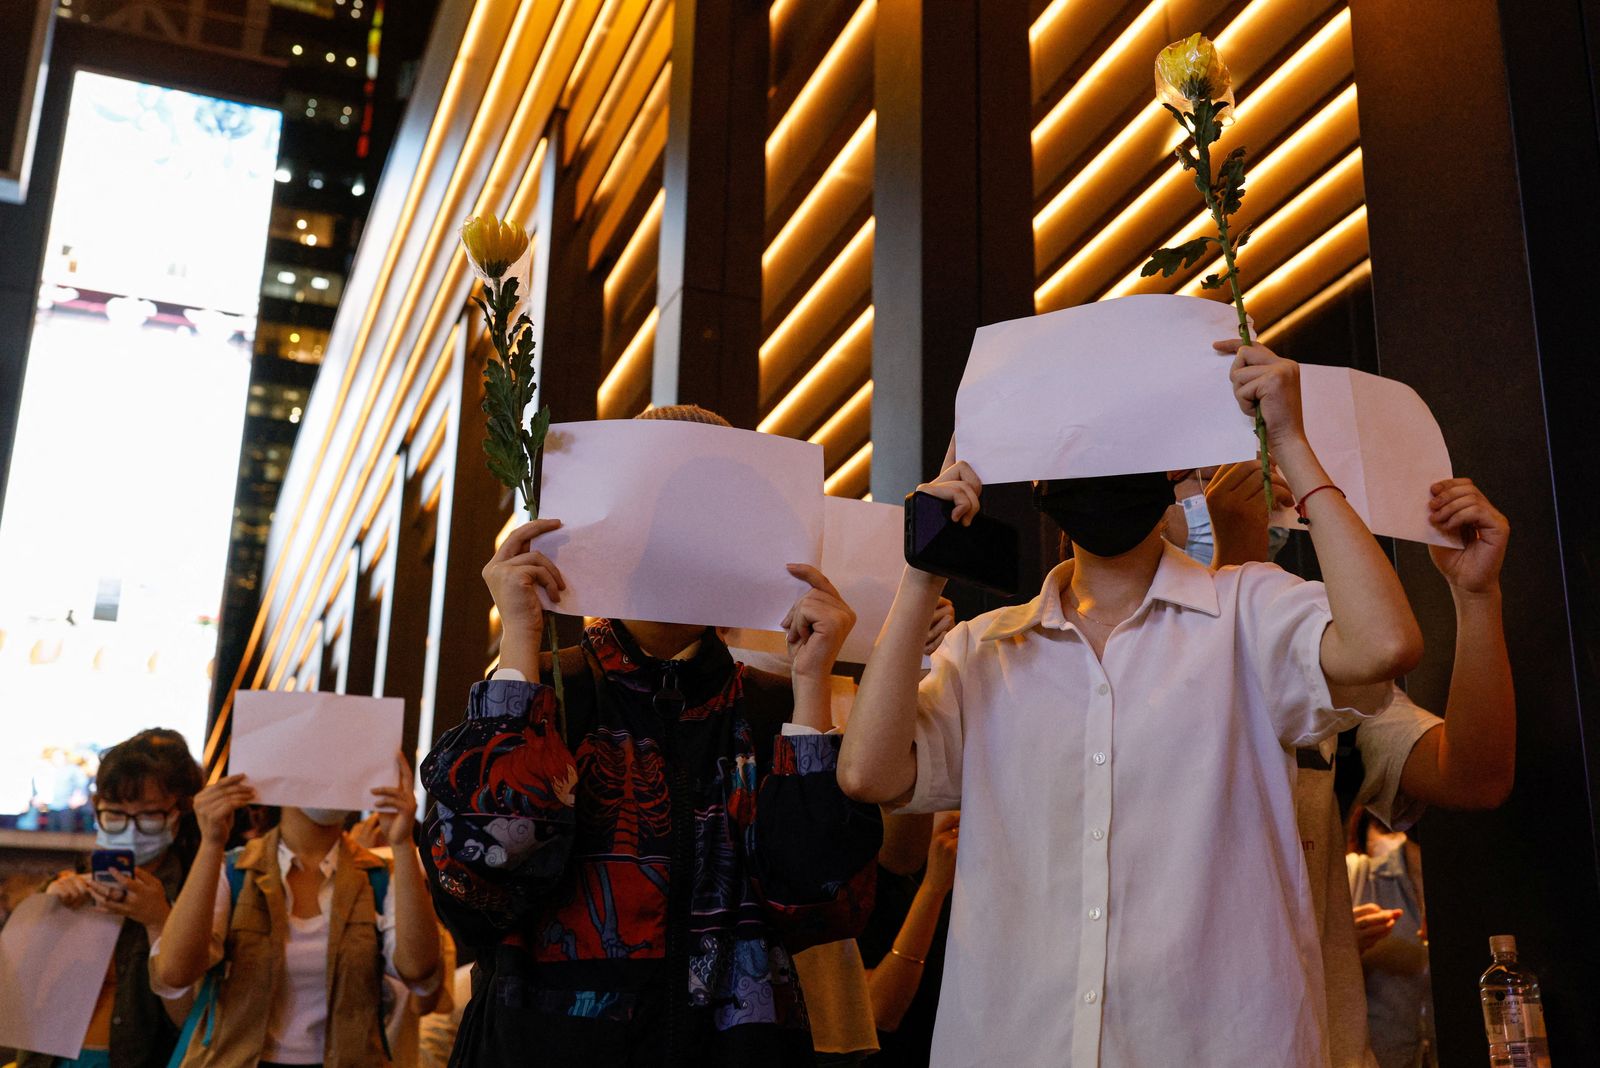 People hold white sheets of paper in protest over COVID-19 restrictions in mainland China, in Hong Kong - REUTERS